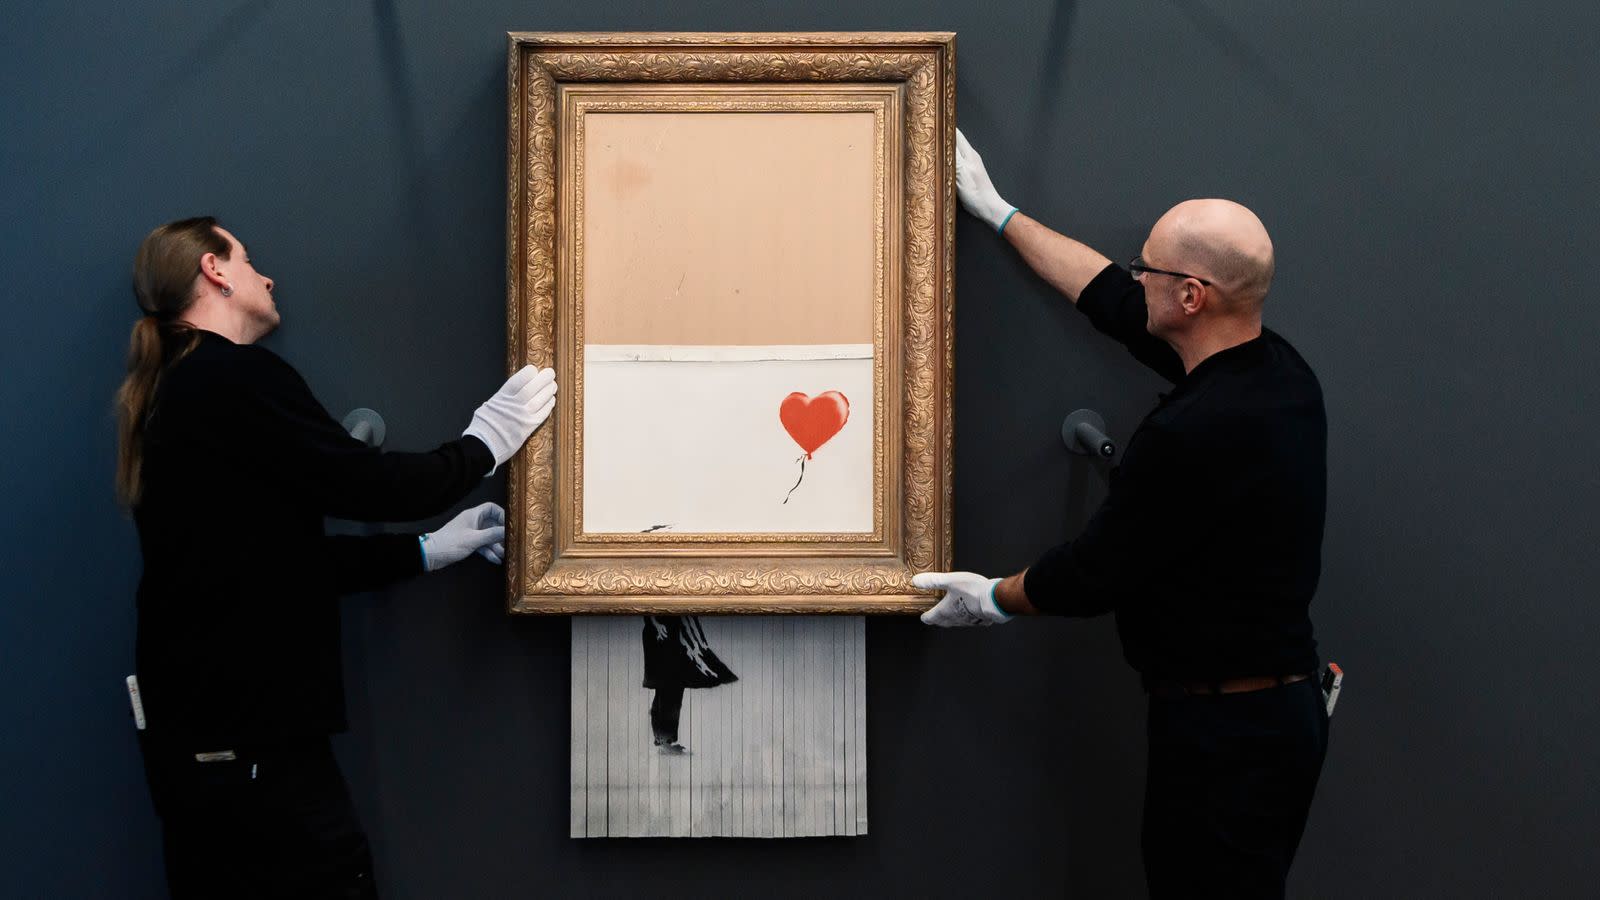 How Much Has The Art Market Rebounded In 2021 And What Does This Mean For 2022?, We look at the...